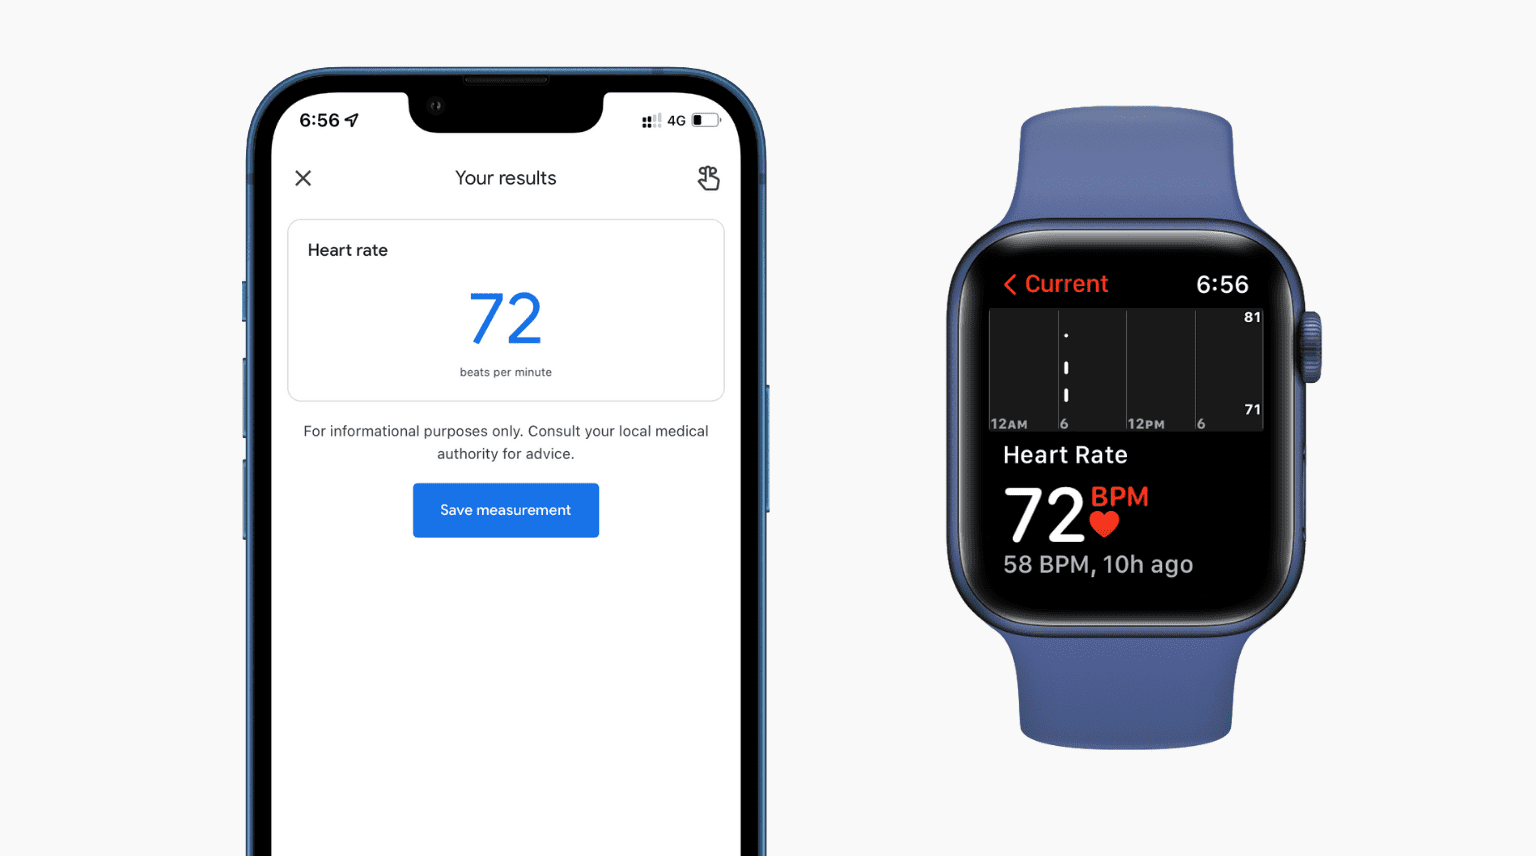 Heart-rate-from-Google-Fit-and-Apple-Watch-6.56-AM